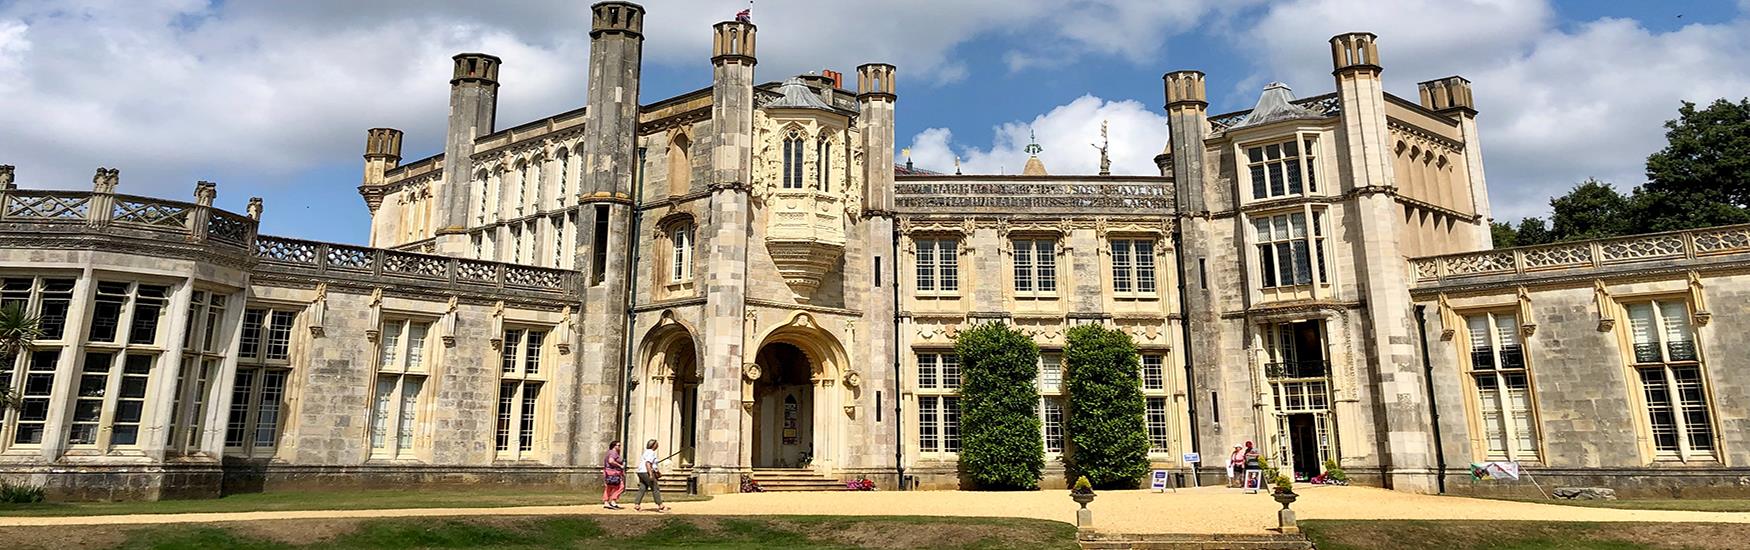 Lovely sunny shot of Highcliffe castle with vistors sitting in the sun outside